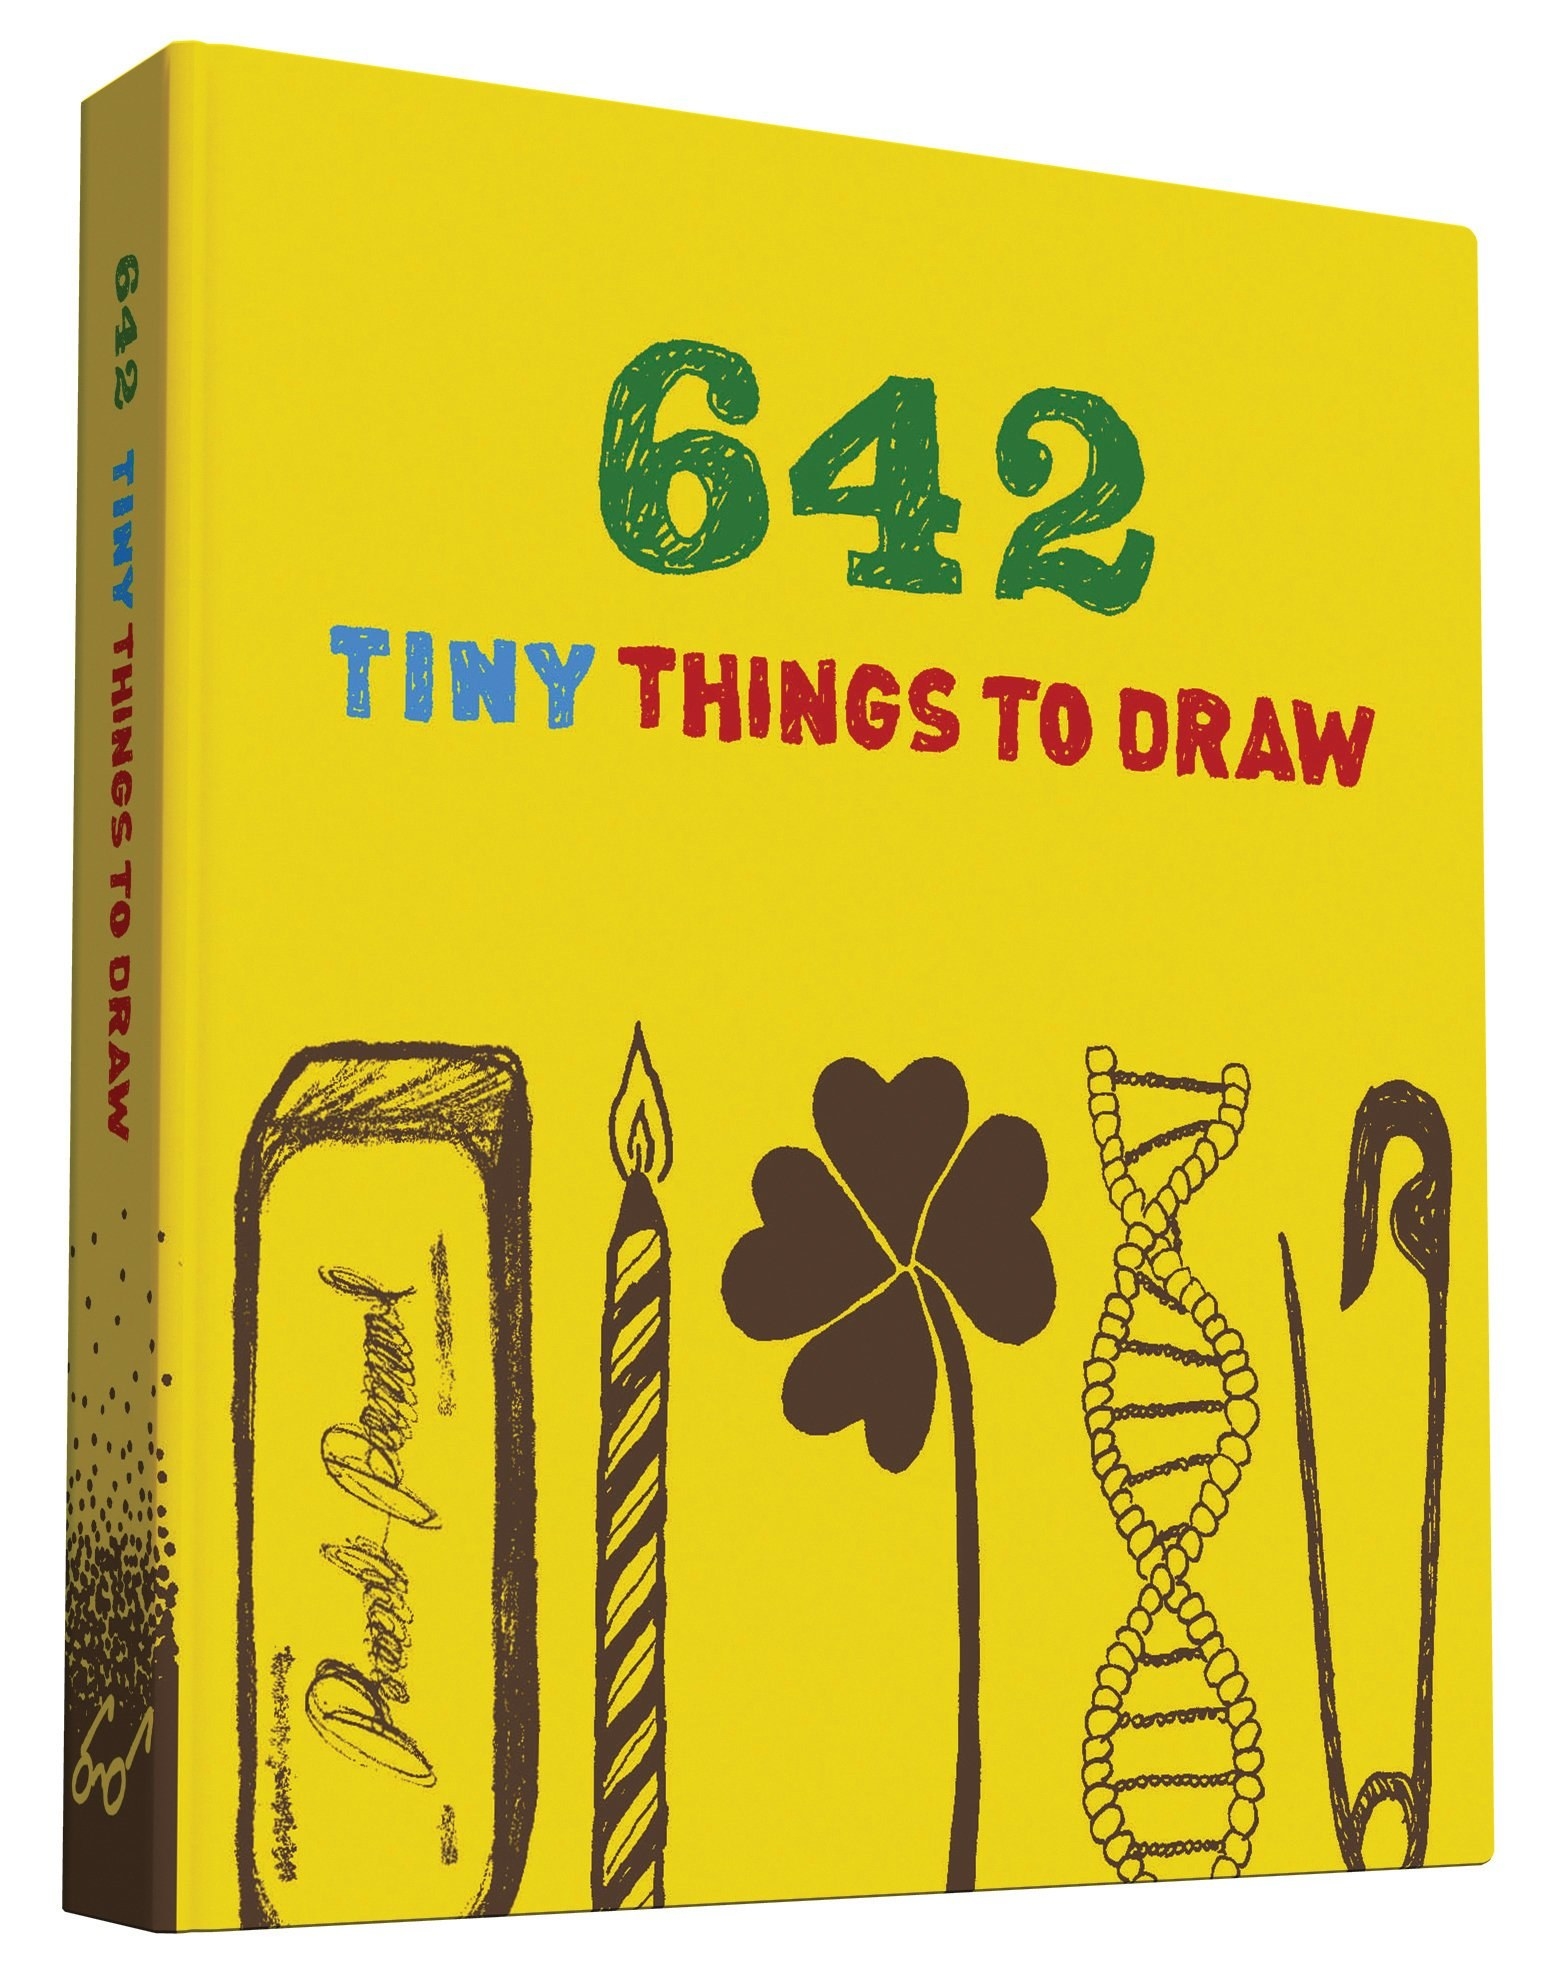 the book cover for 642 tiny things to draw